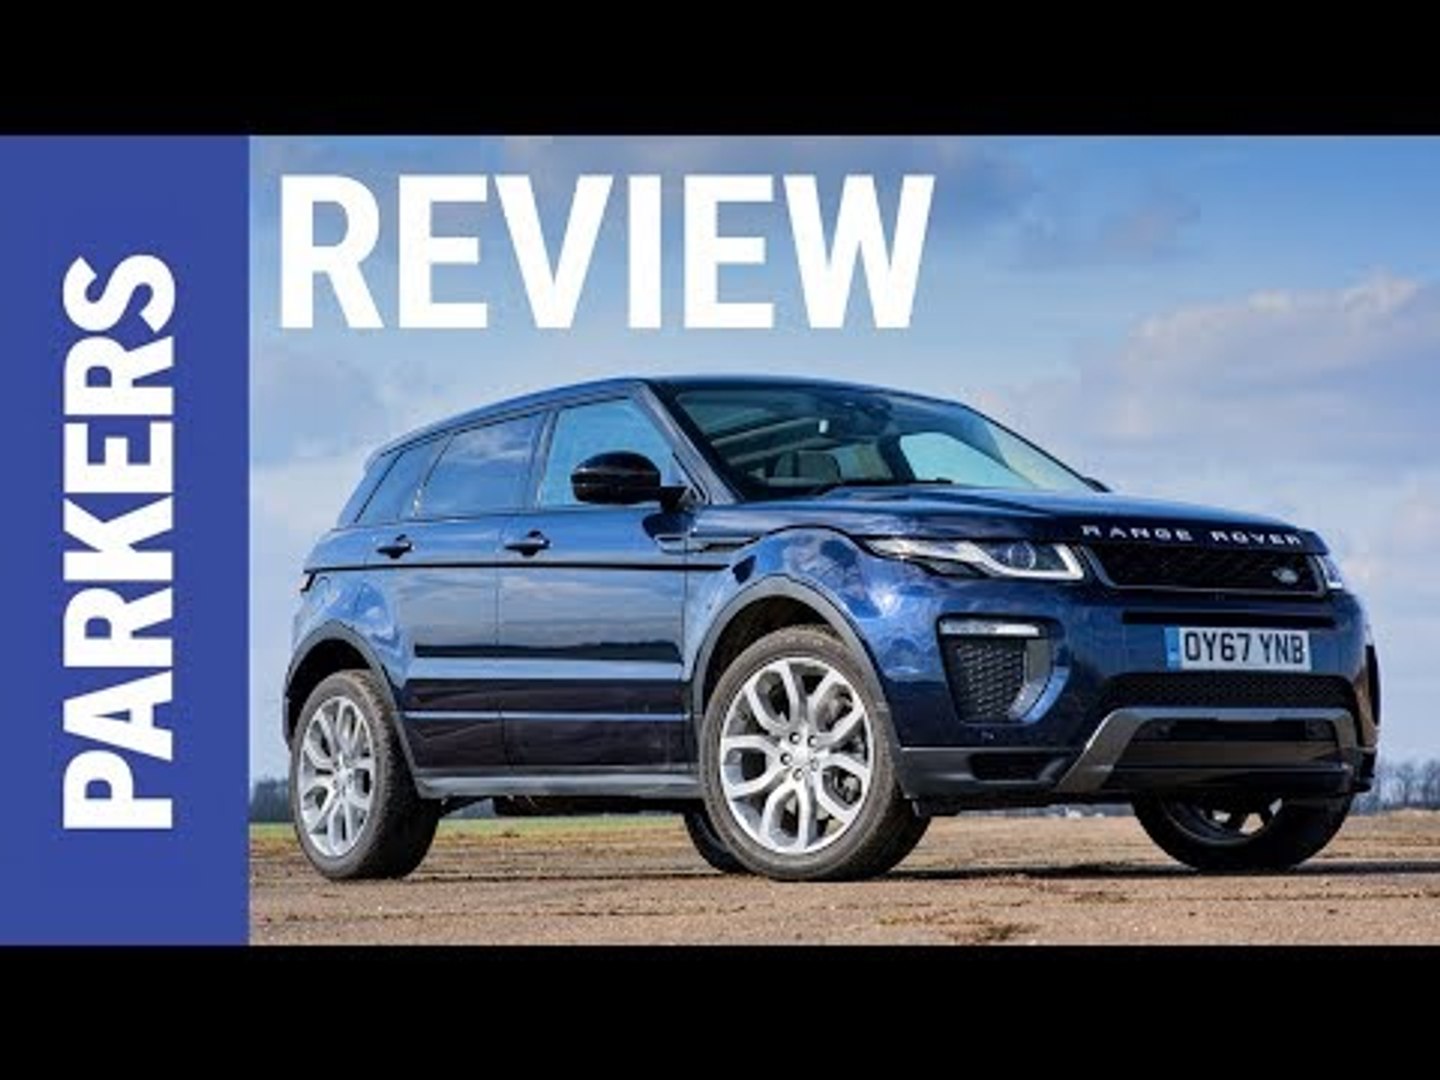 Range Rover Evoque review | Is it the best baby SUV? - video Dailymotion